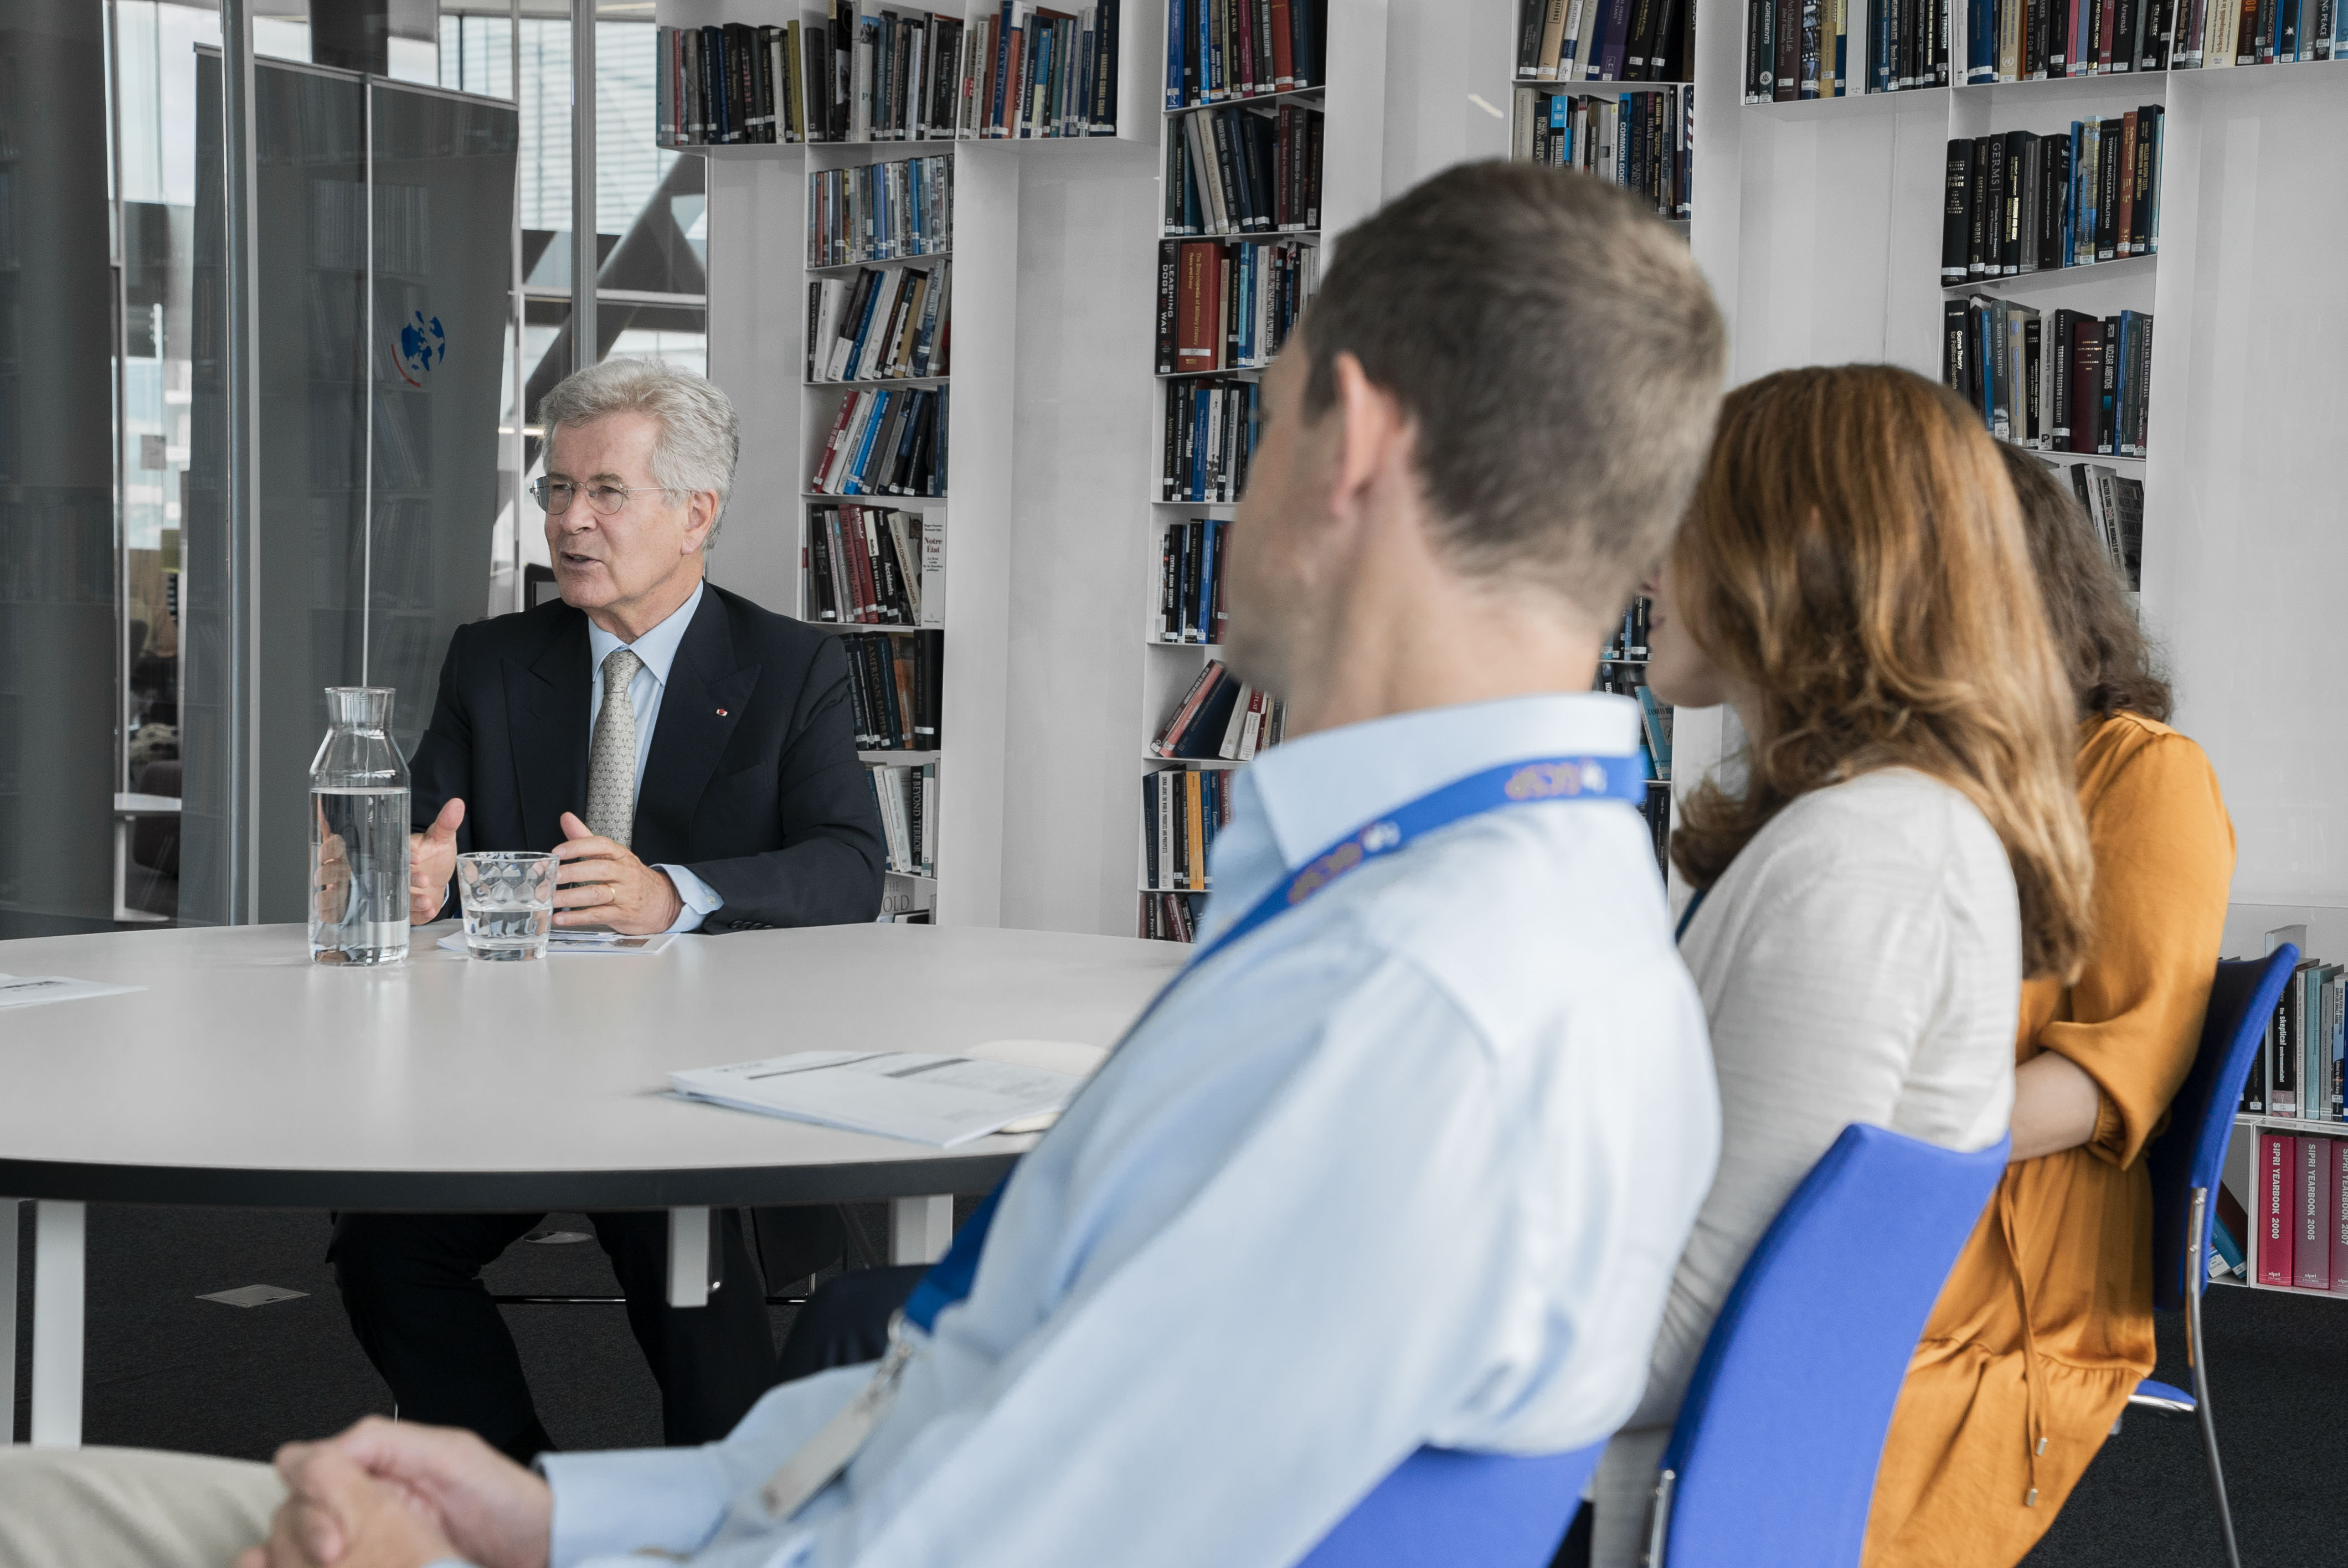 GCSP Foundation Council President, Amb. Jean-David Levitte meets with staff and department leaders.